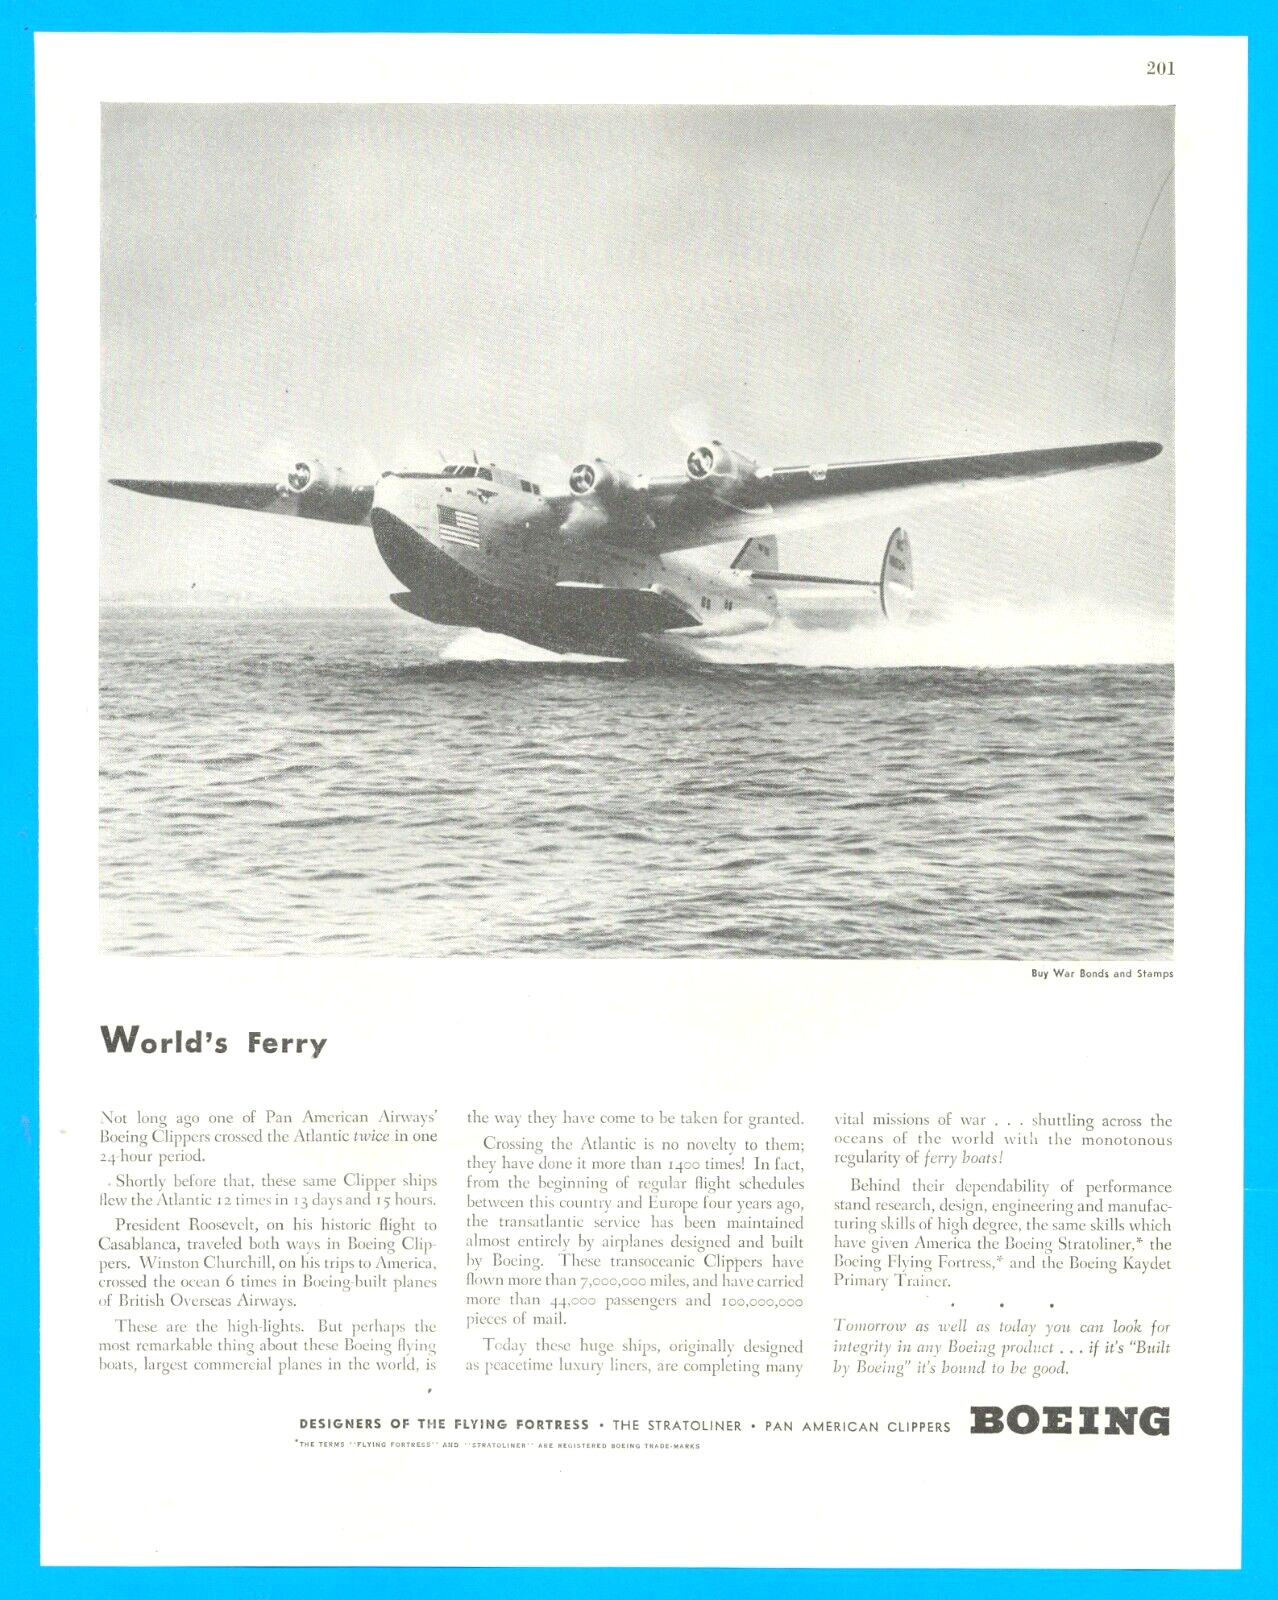 1943 WWII Boeing Pan American Clipper aircraft PRINT AD crossing the Atlantic